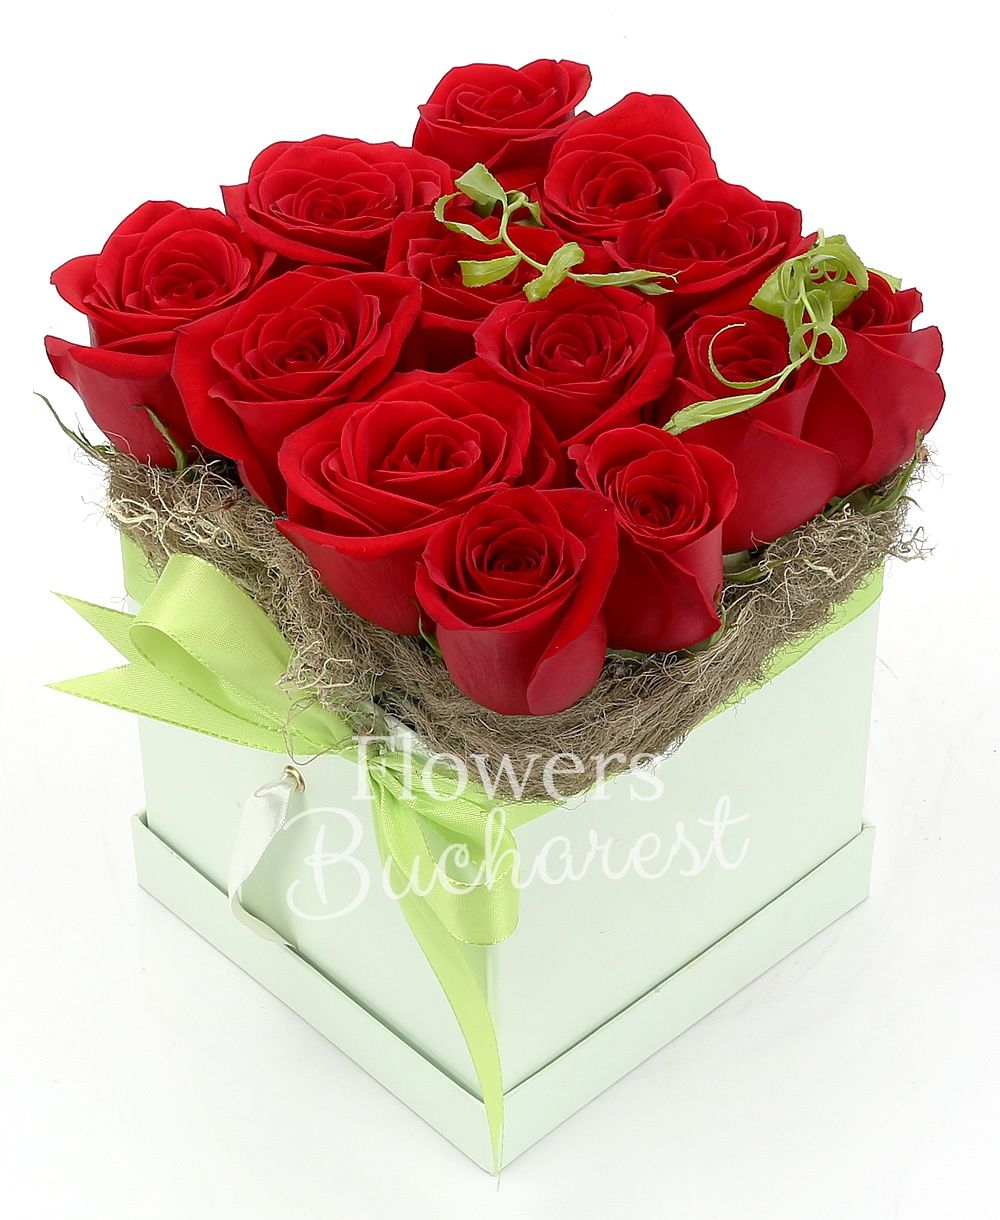 13 red roses, greenery